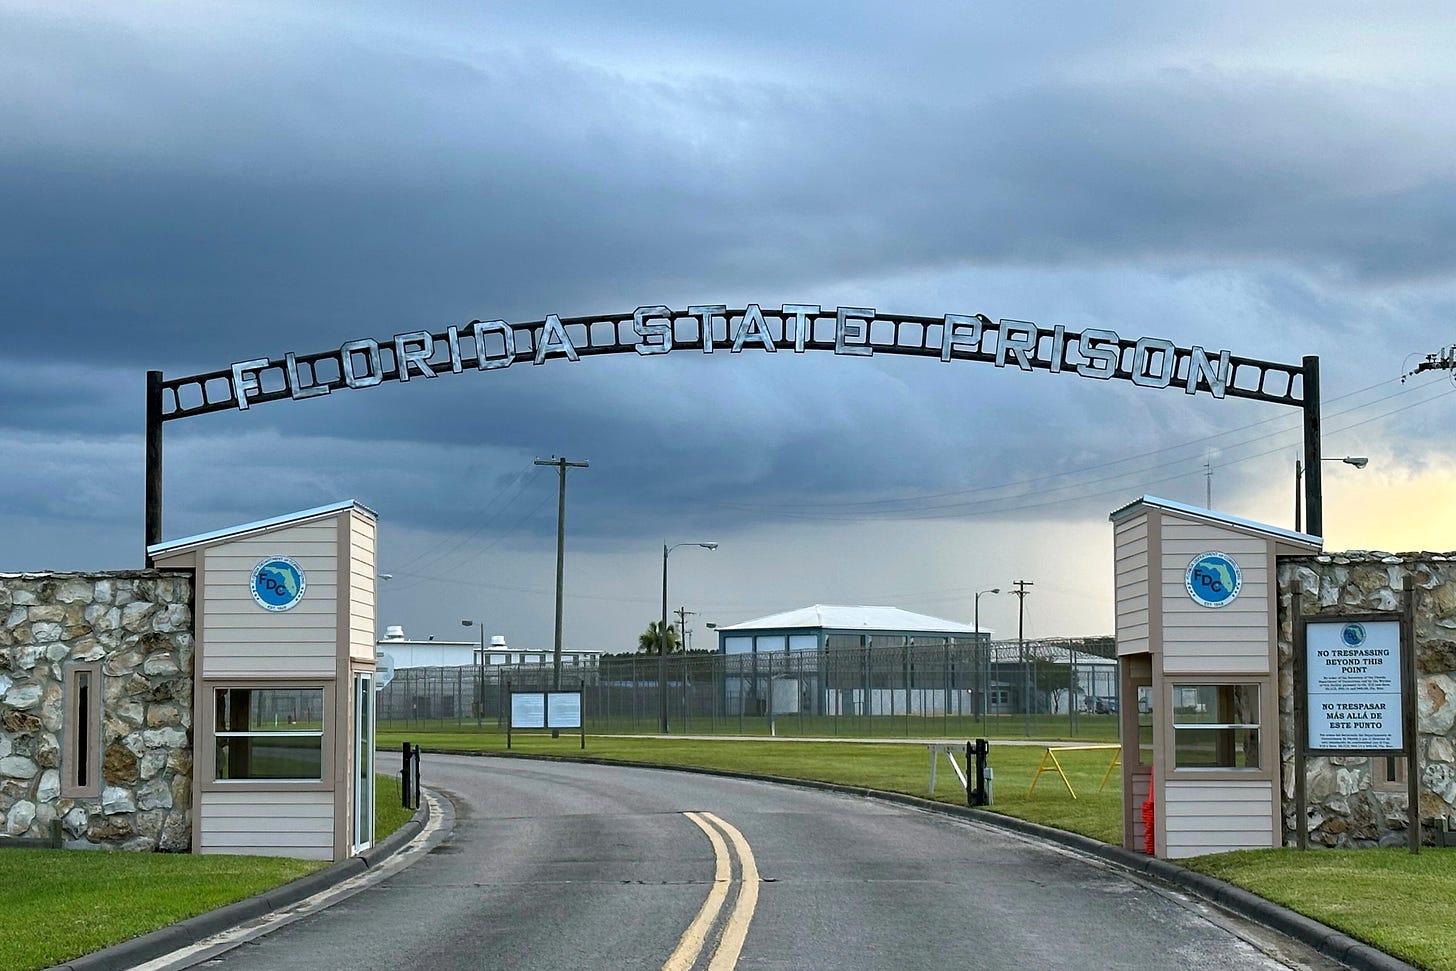 Florida prisons lock people in dirty showers for hours, report finds